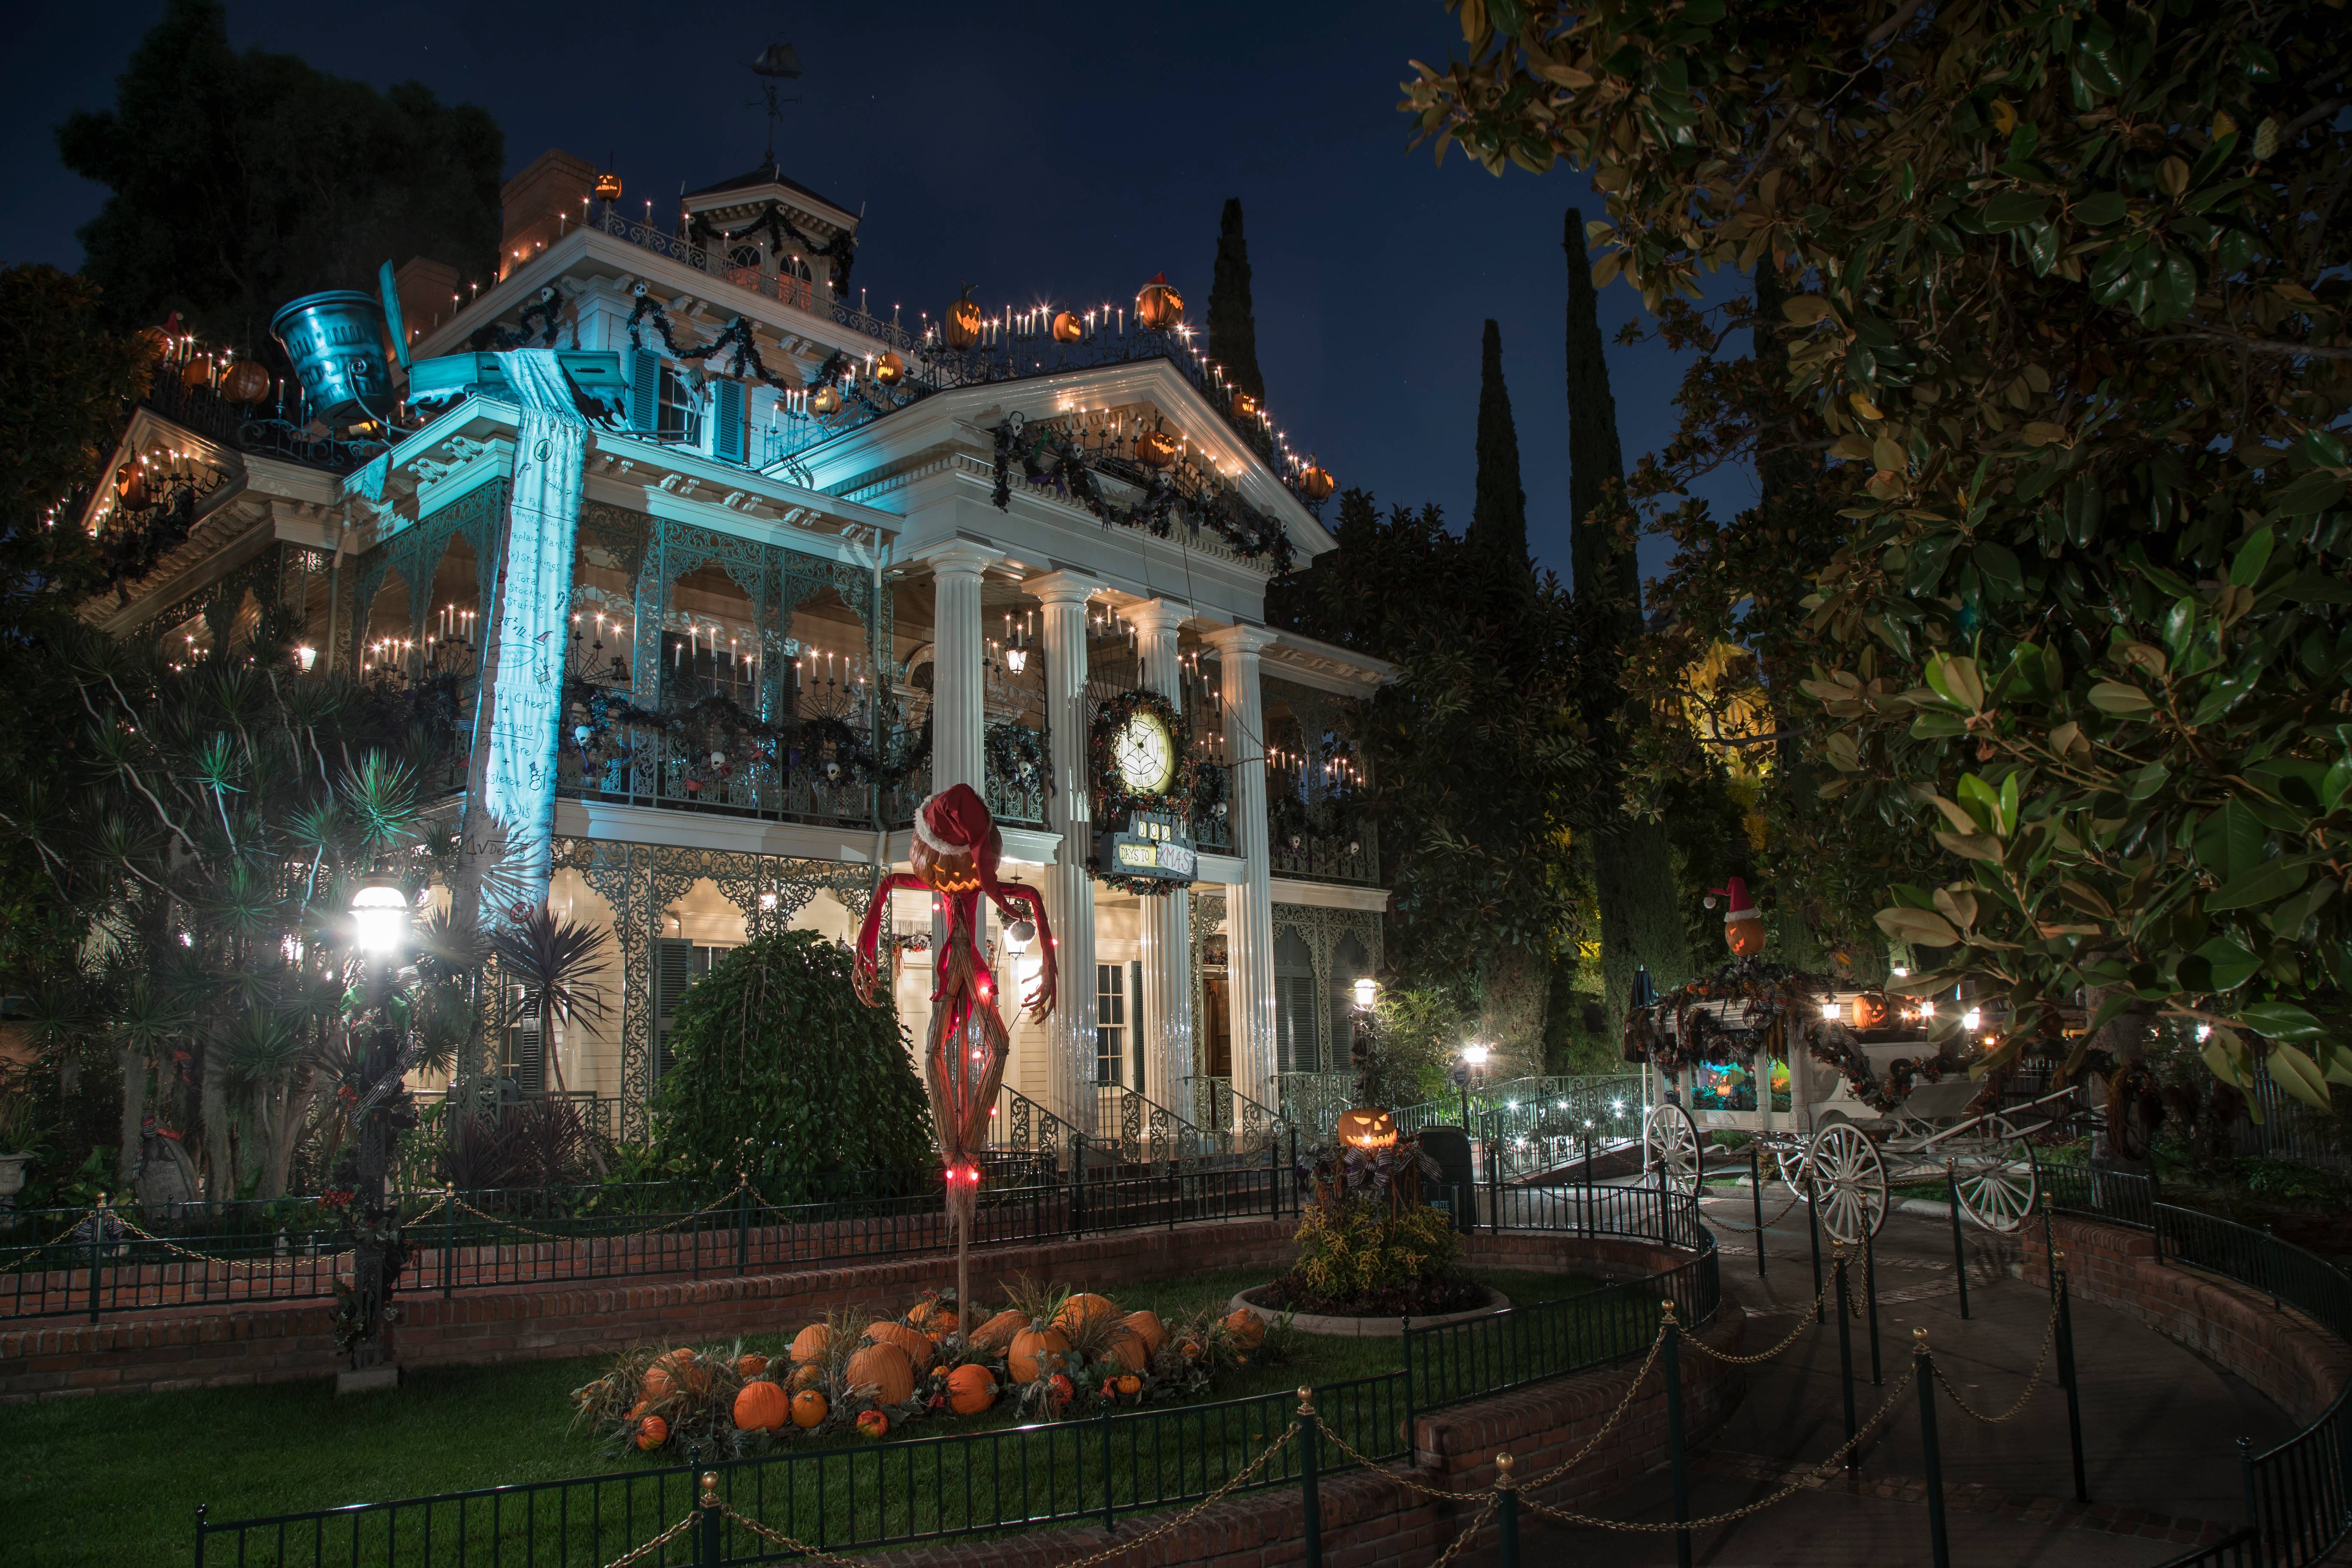 The Haunted Mansion Holiday edition will last 3 week longer this year